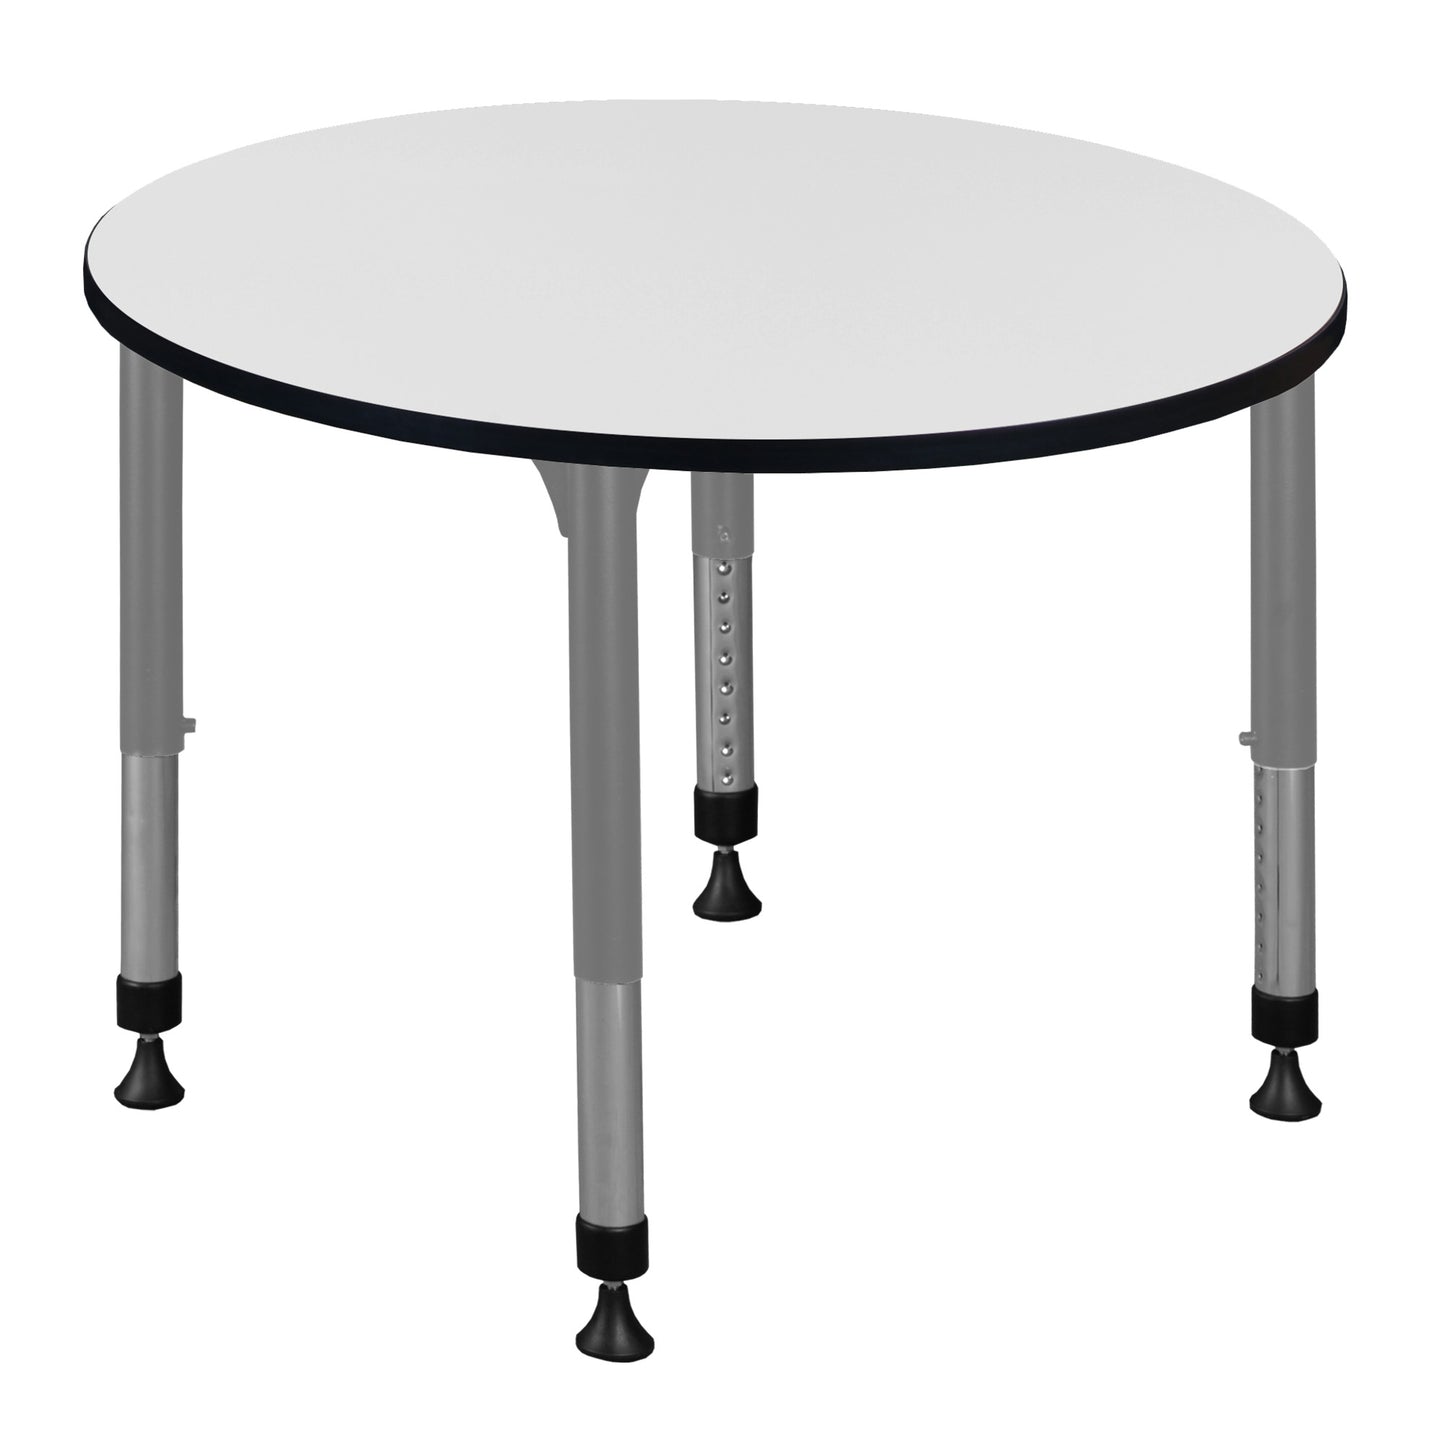 Regency Kee 36 in. Round Height Adjustable Mobile Classroom Activity Table